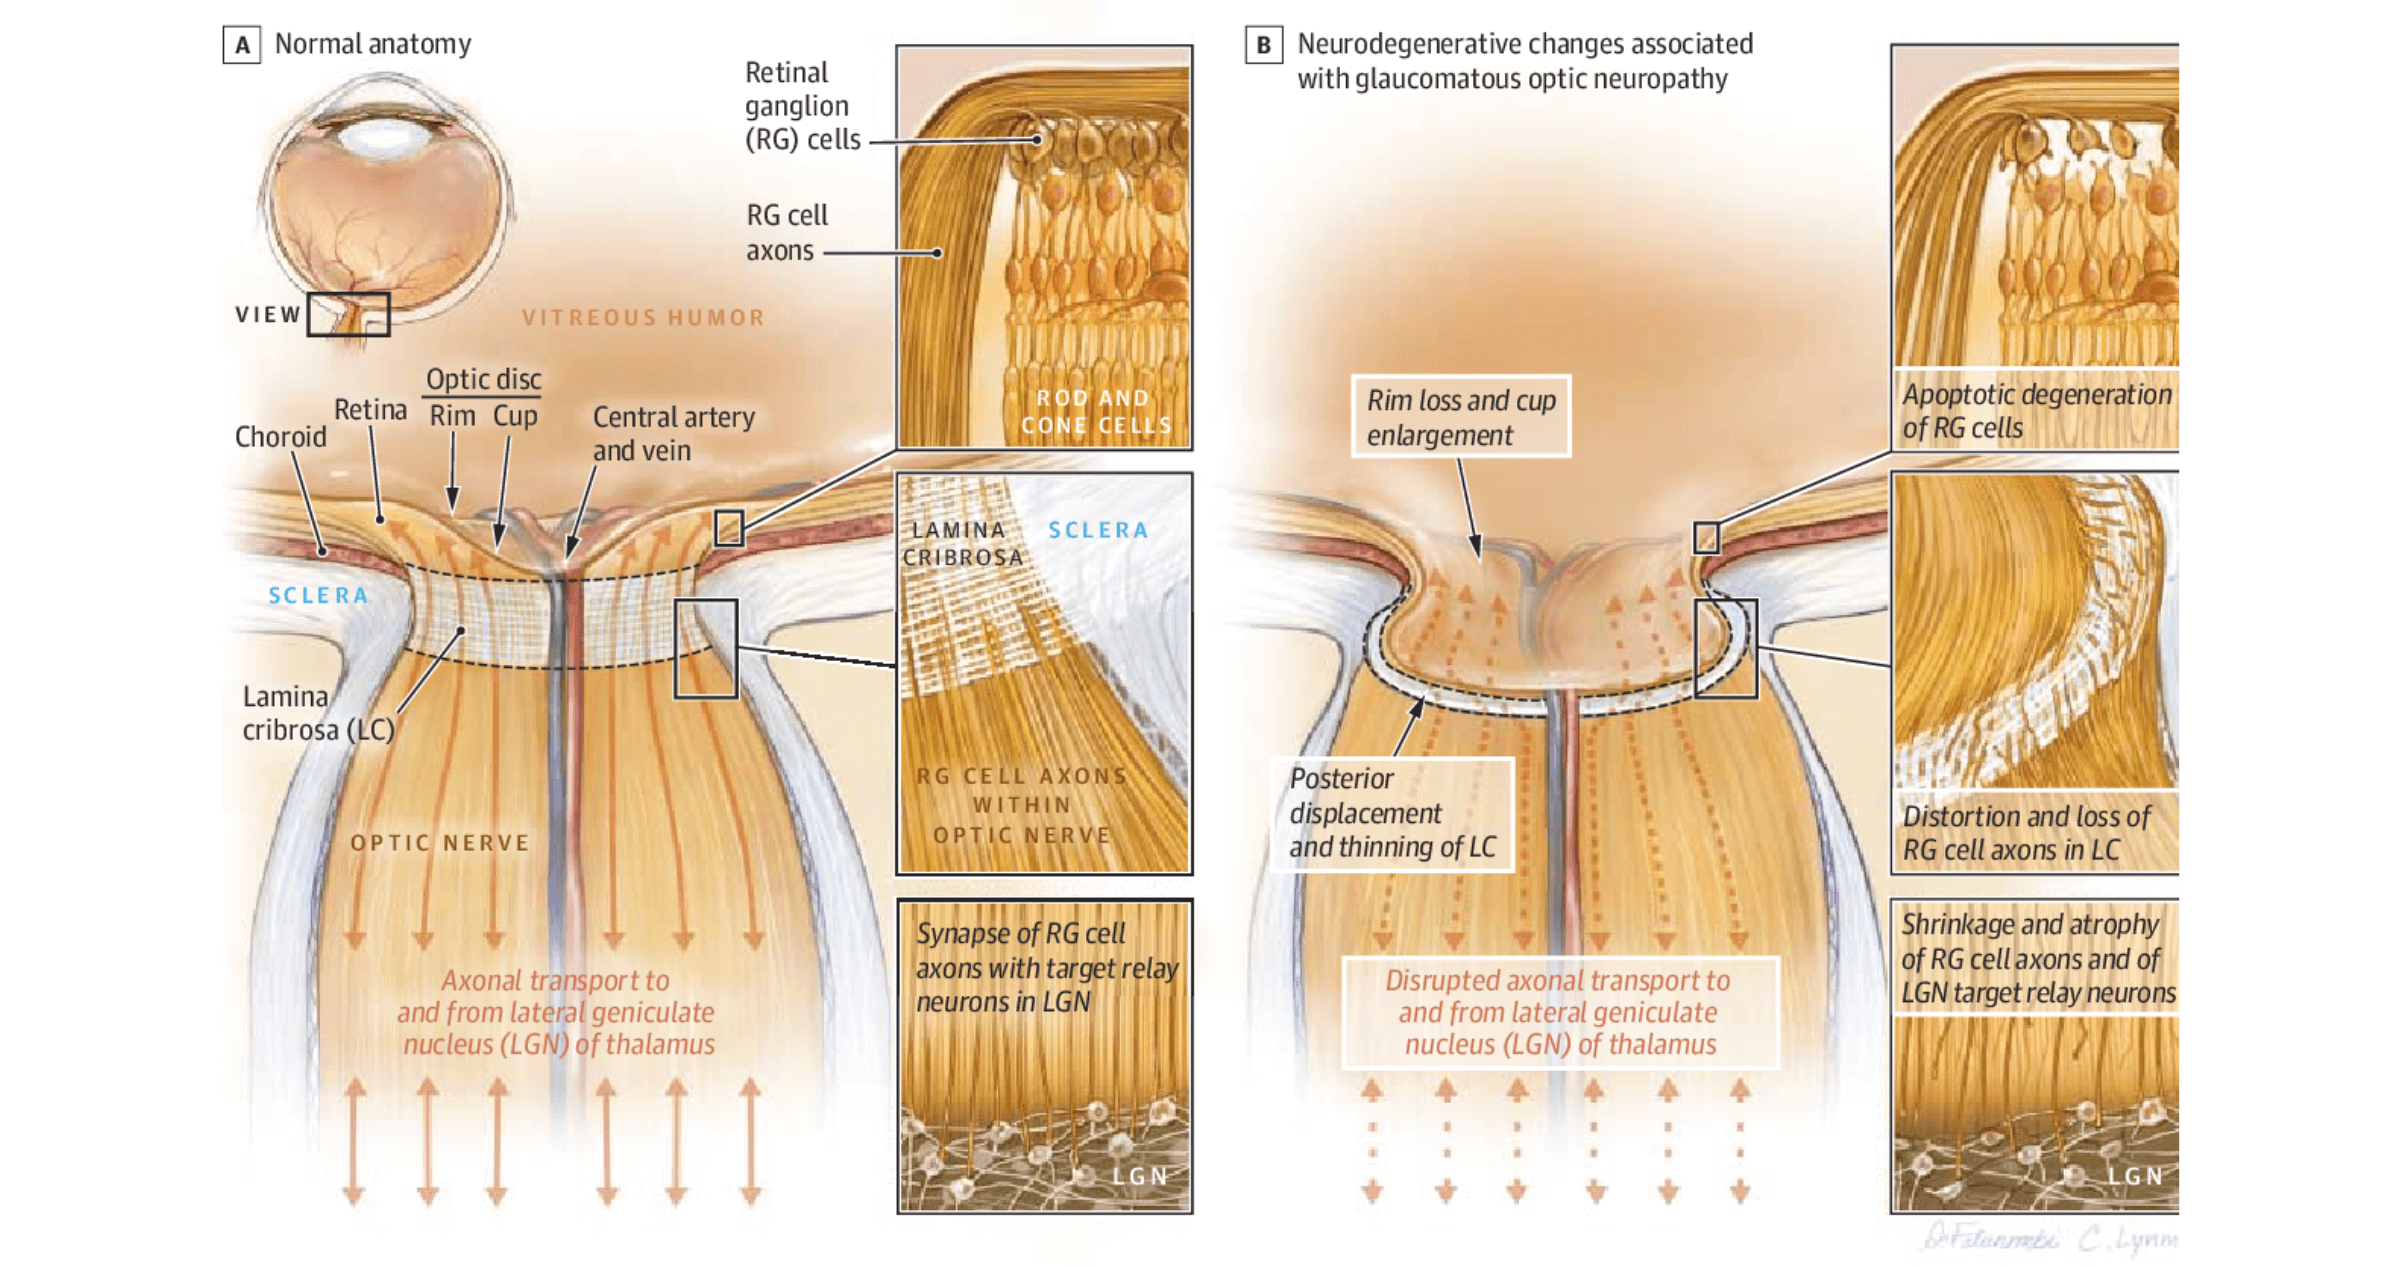 An illustration of the optic nerve showing normal anatomy vs neurodegenerative changes